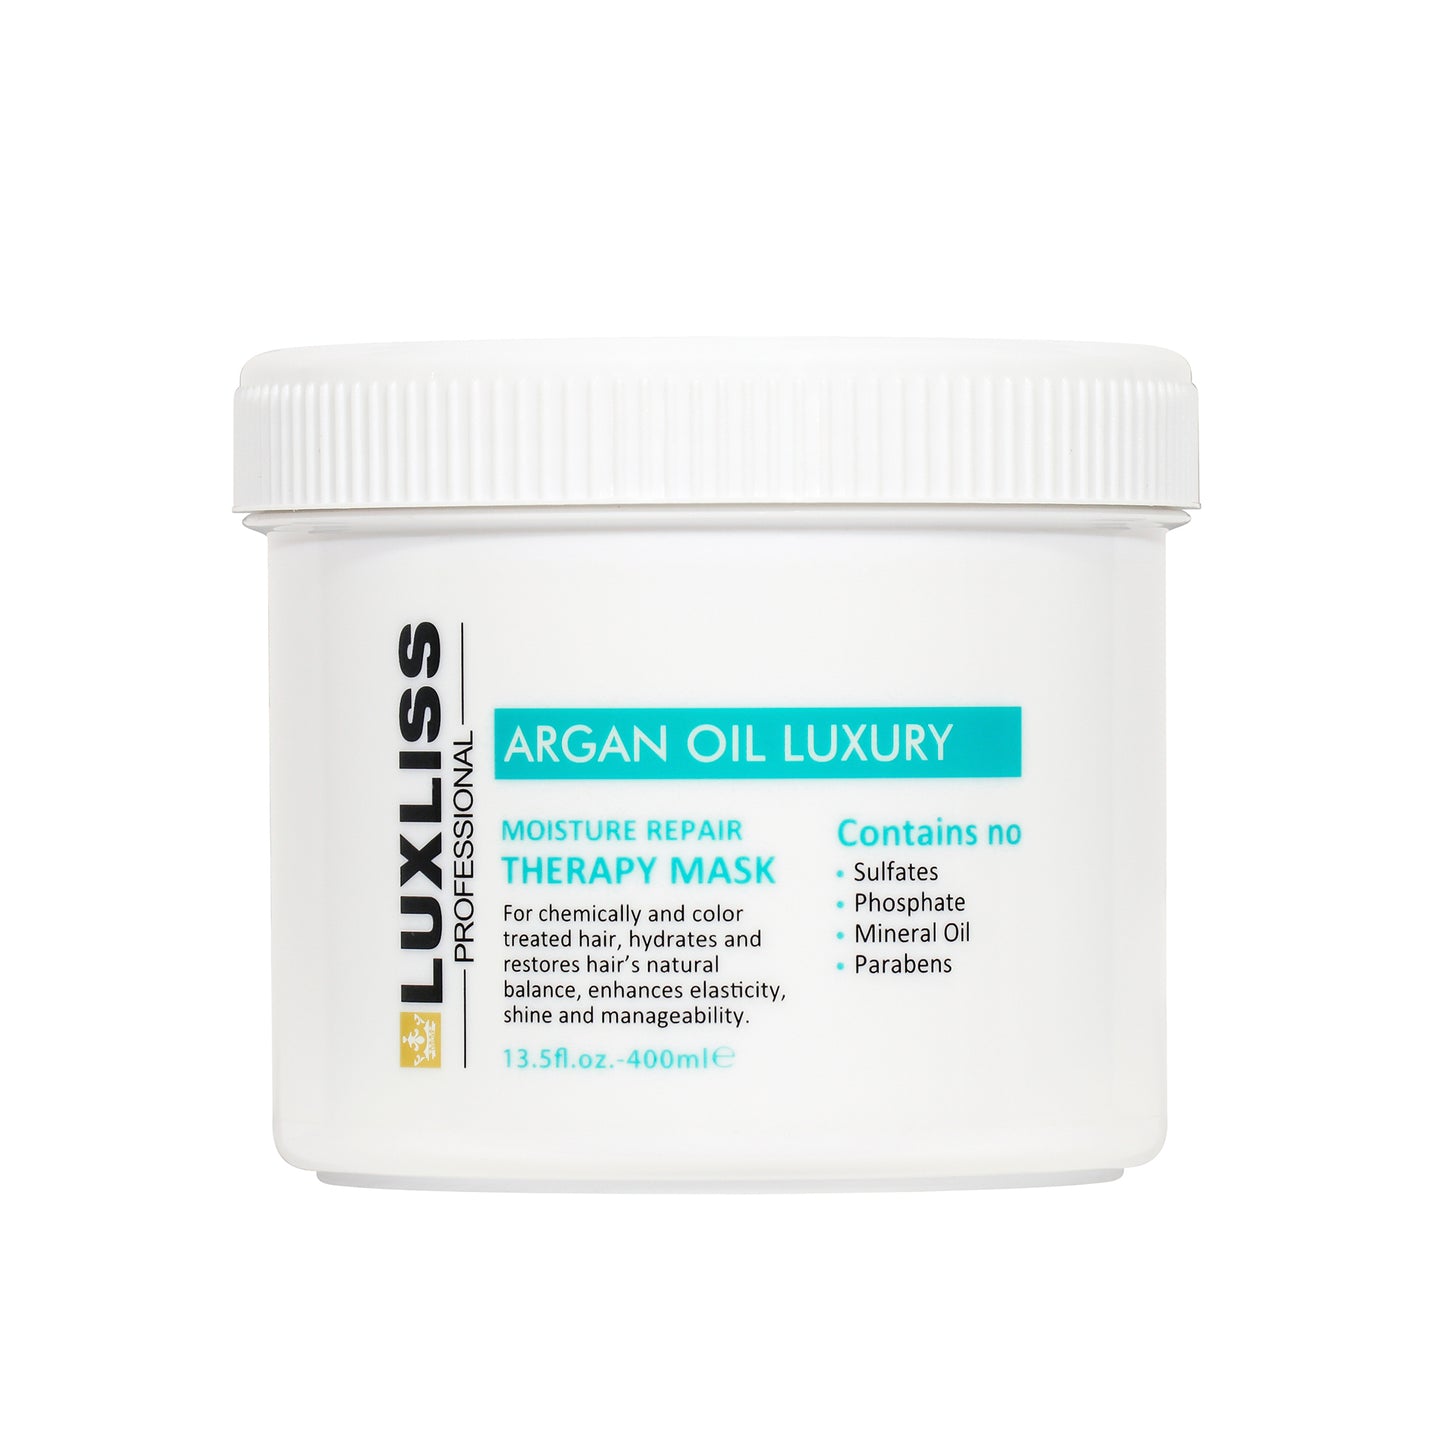 Argan Oil Luxury Moisture Therapy Mask Luxliss Professional